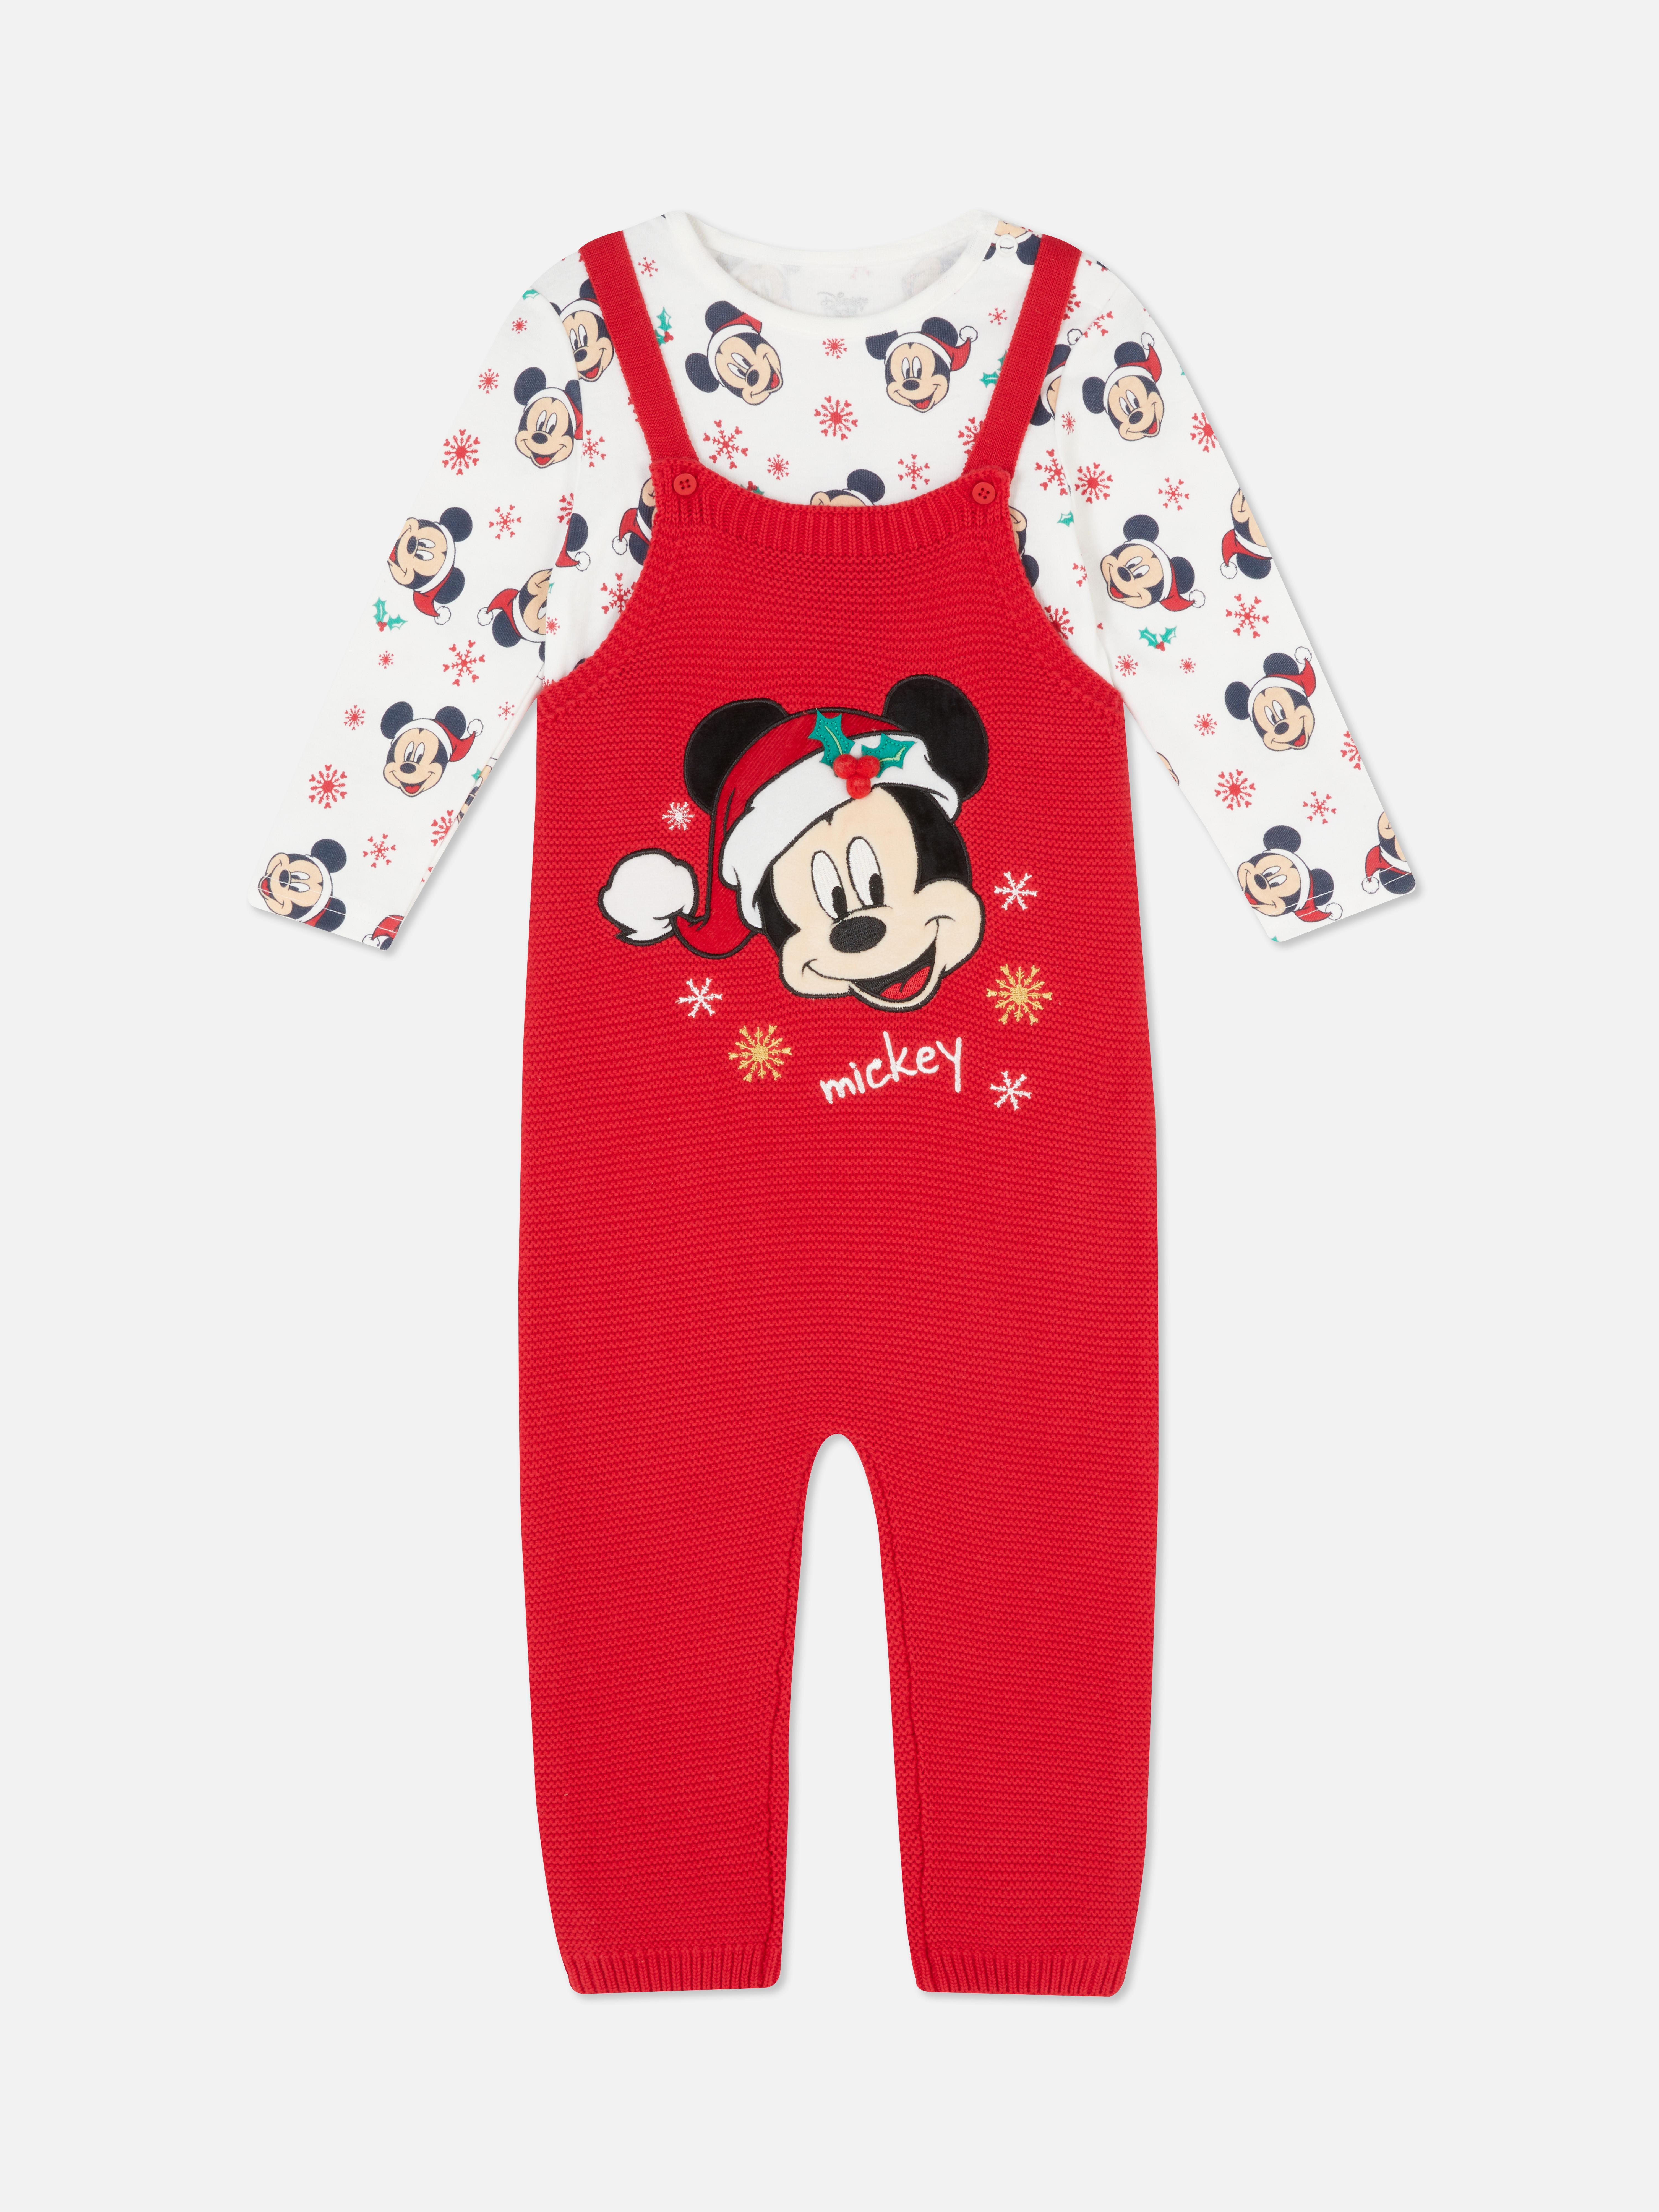 Disney's Mickey Mouse Knitted Dungaree Set